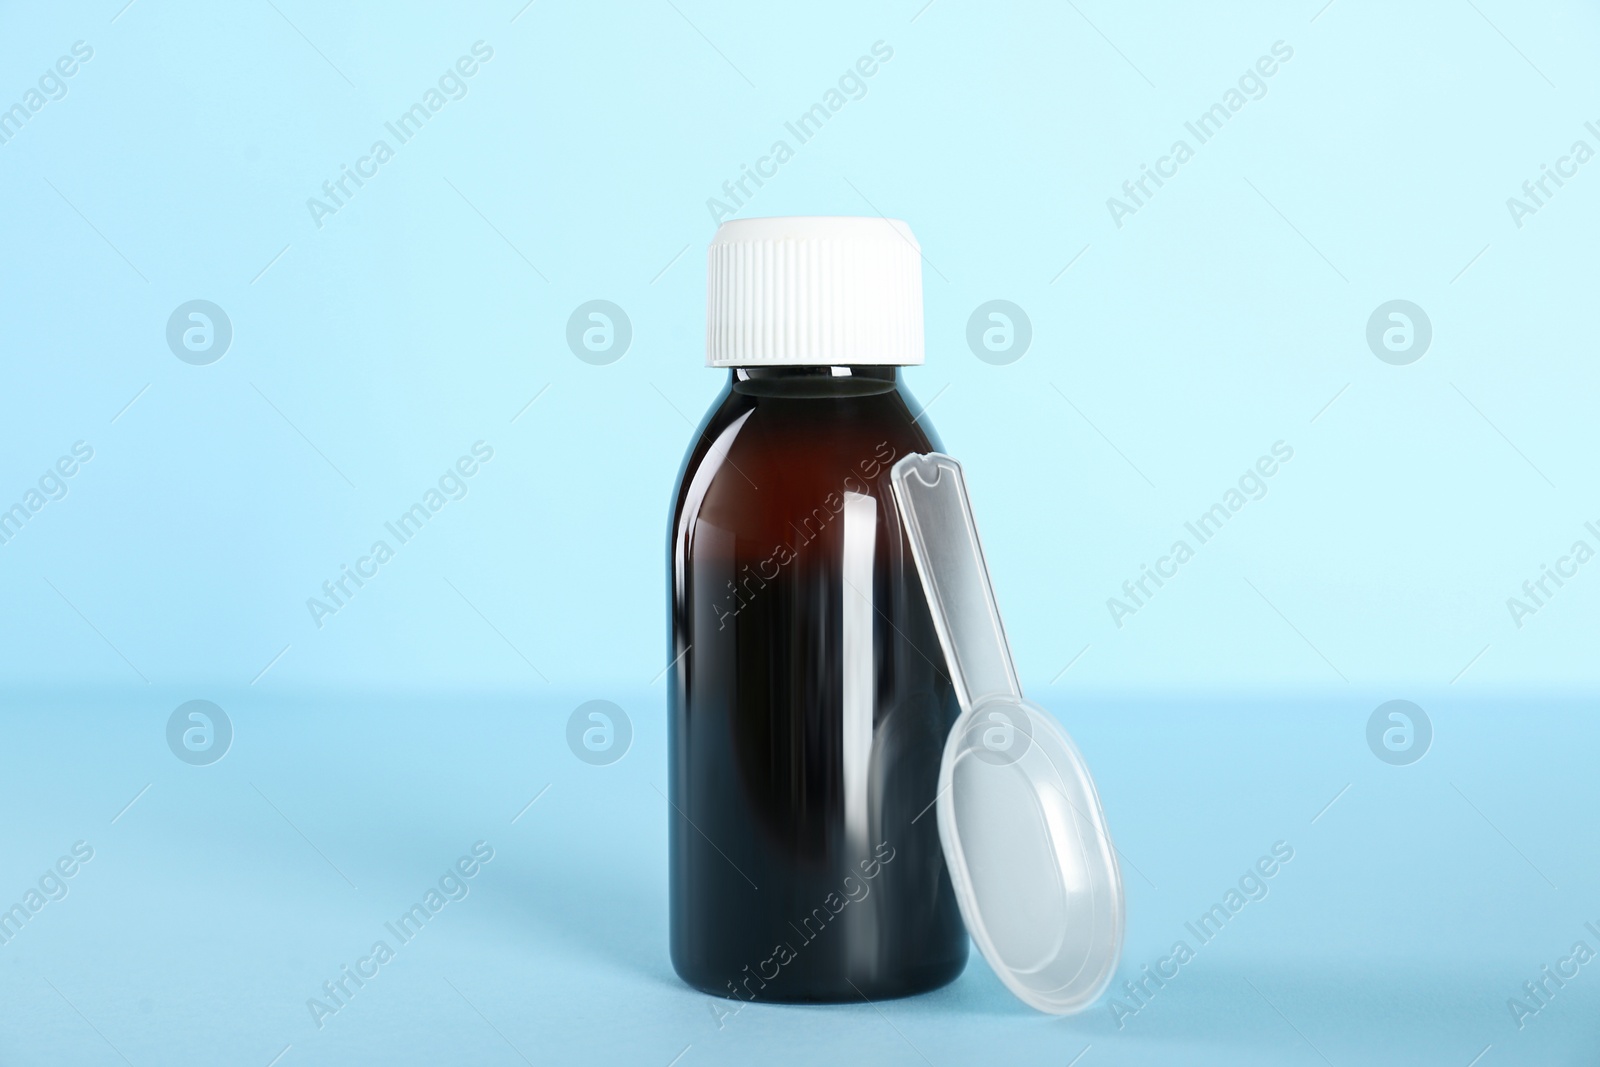 Photo of Bottle of cough syrup and dosing spoon on light blue background